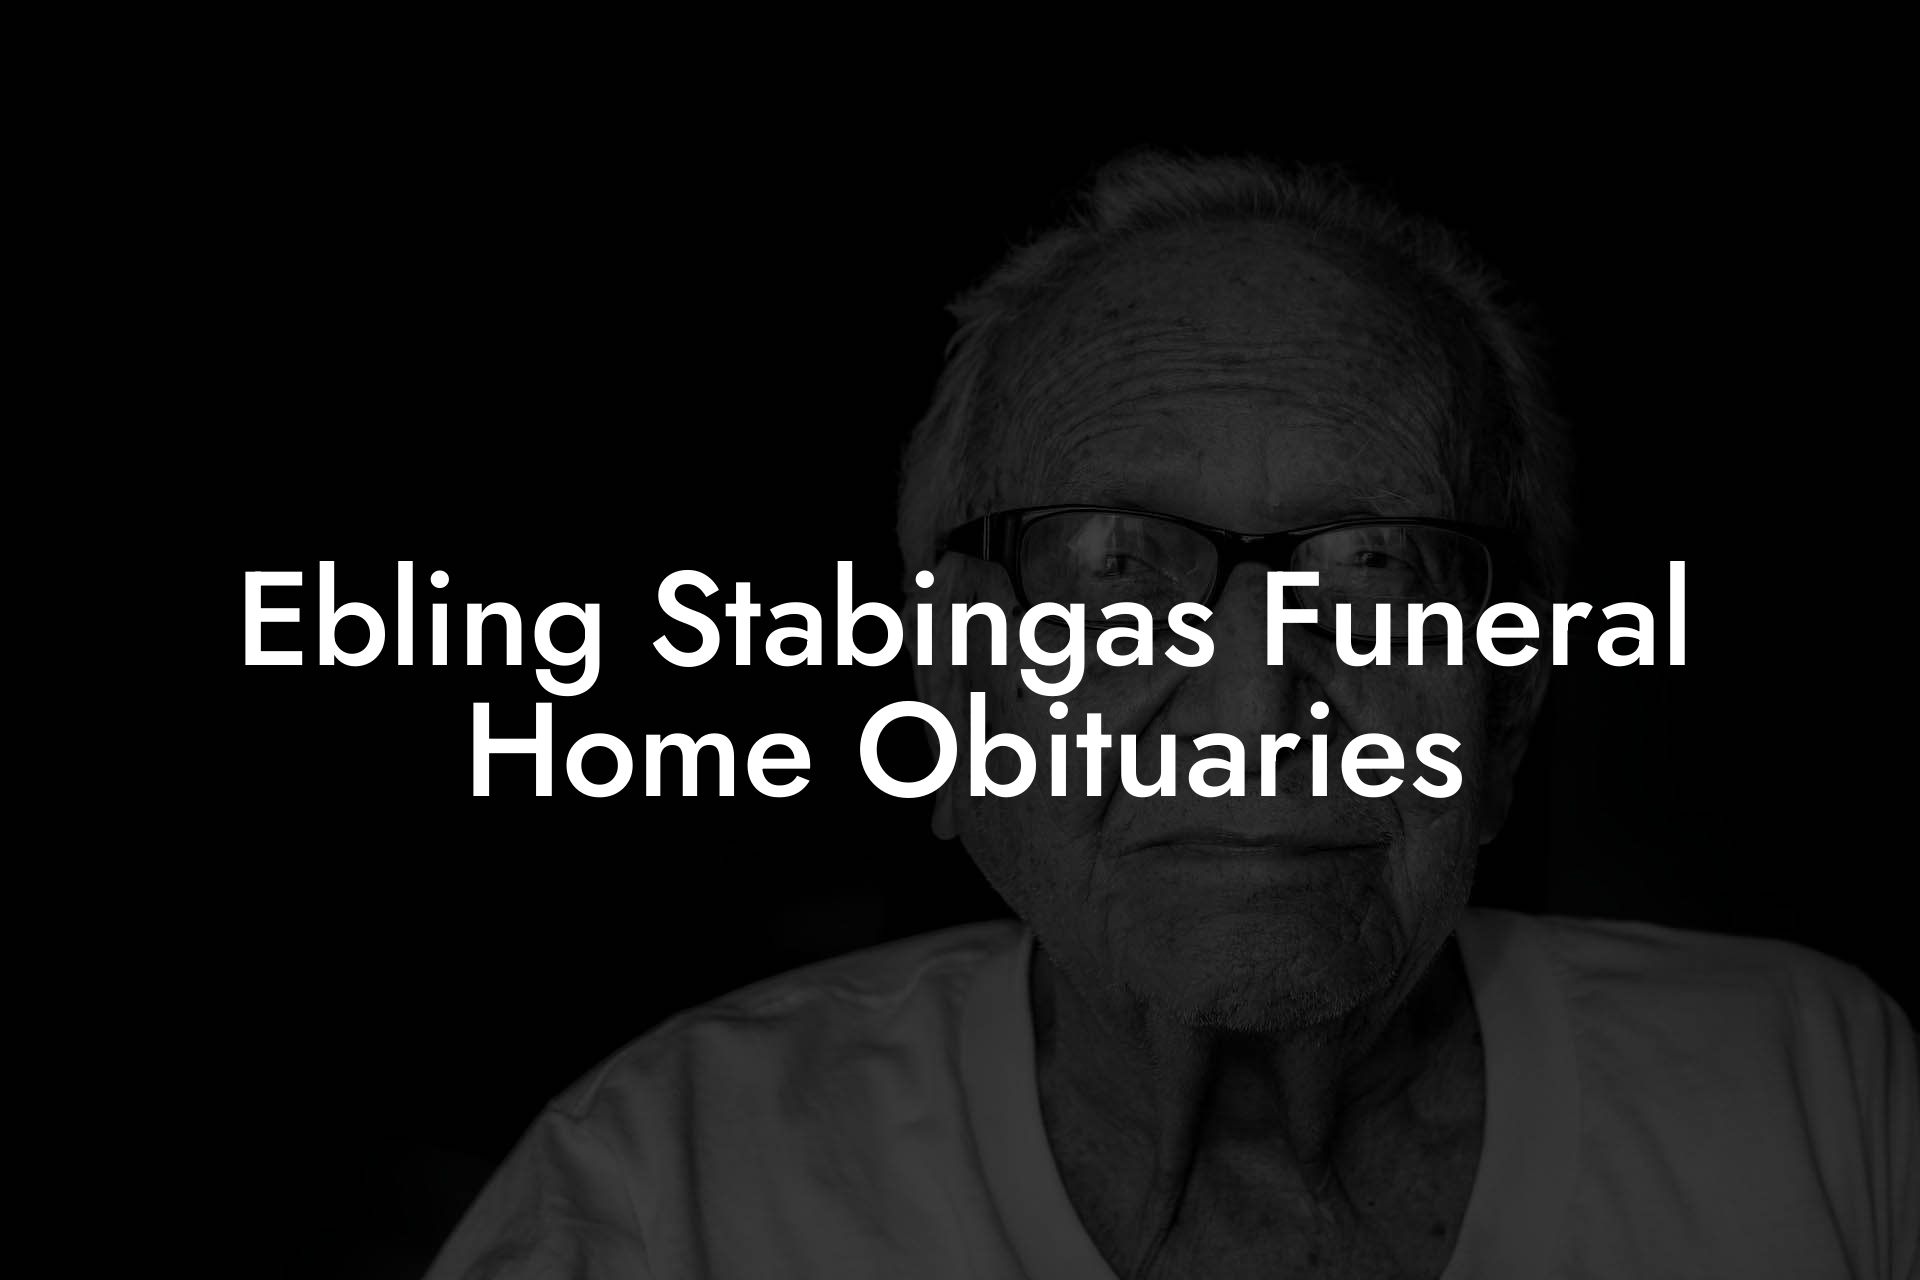 Ebling Stabingas Funeral Home Obituaries